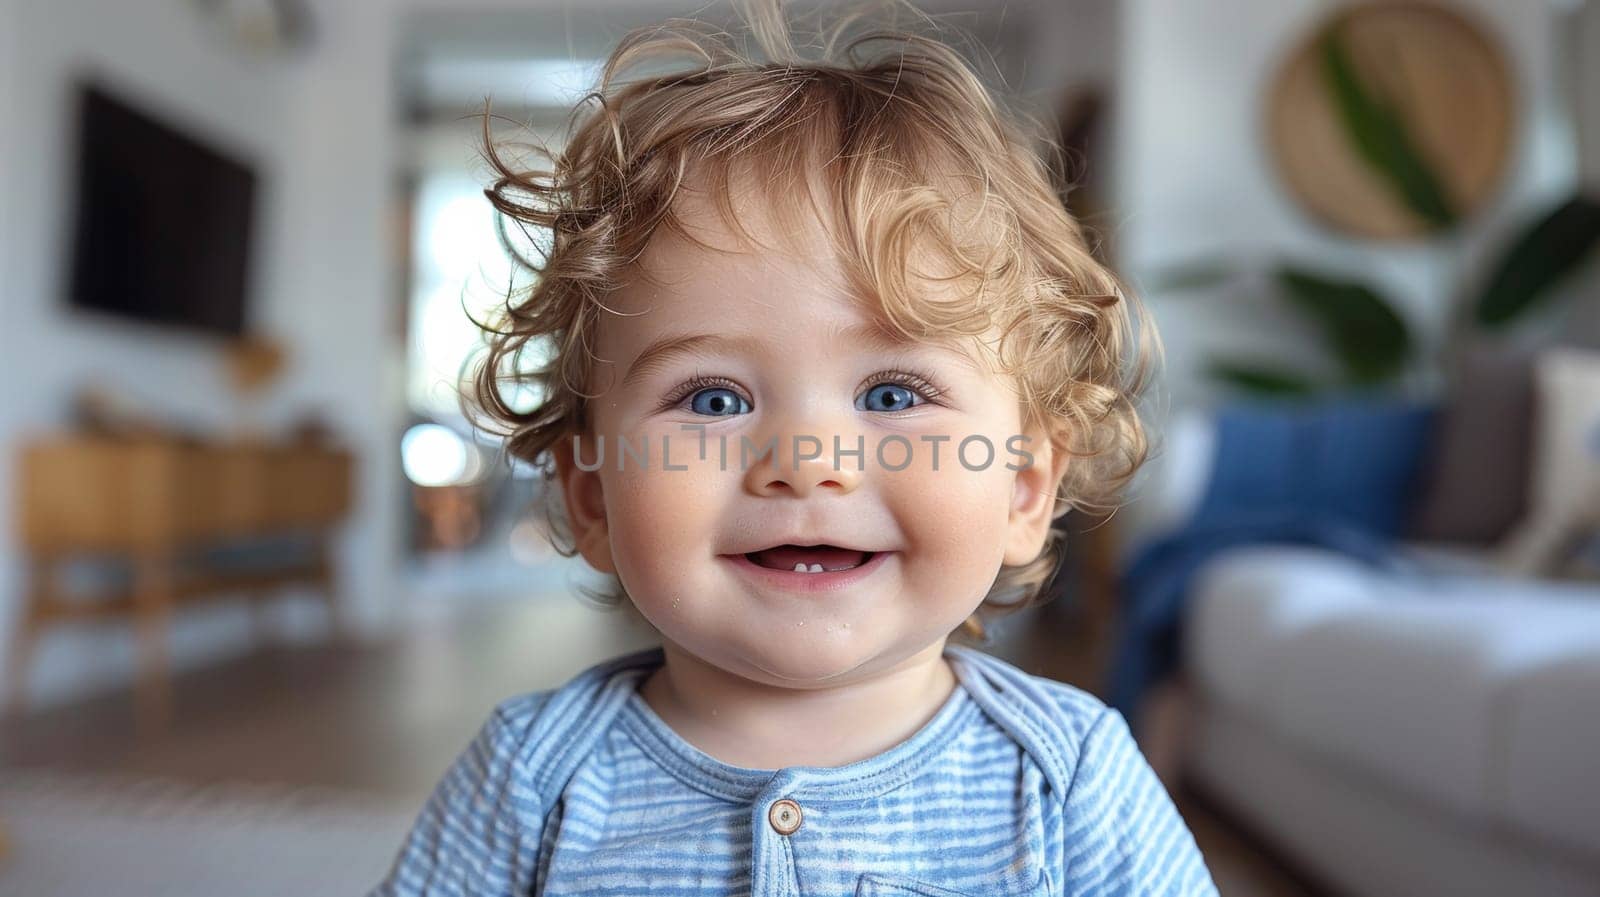 A baby with curly hair smiling in a living room, AI by starush